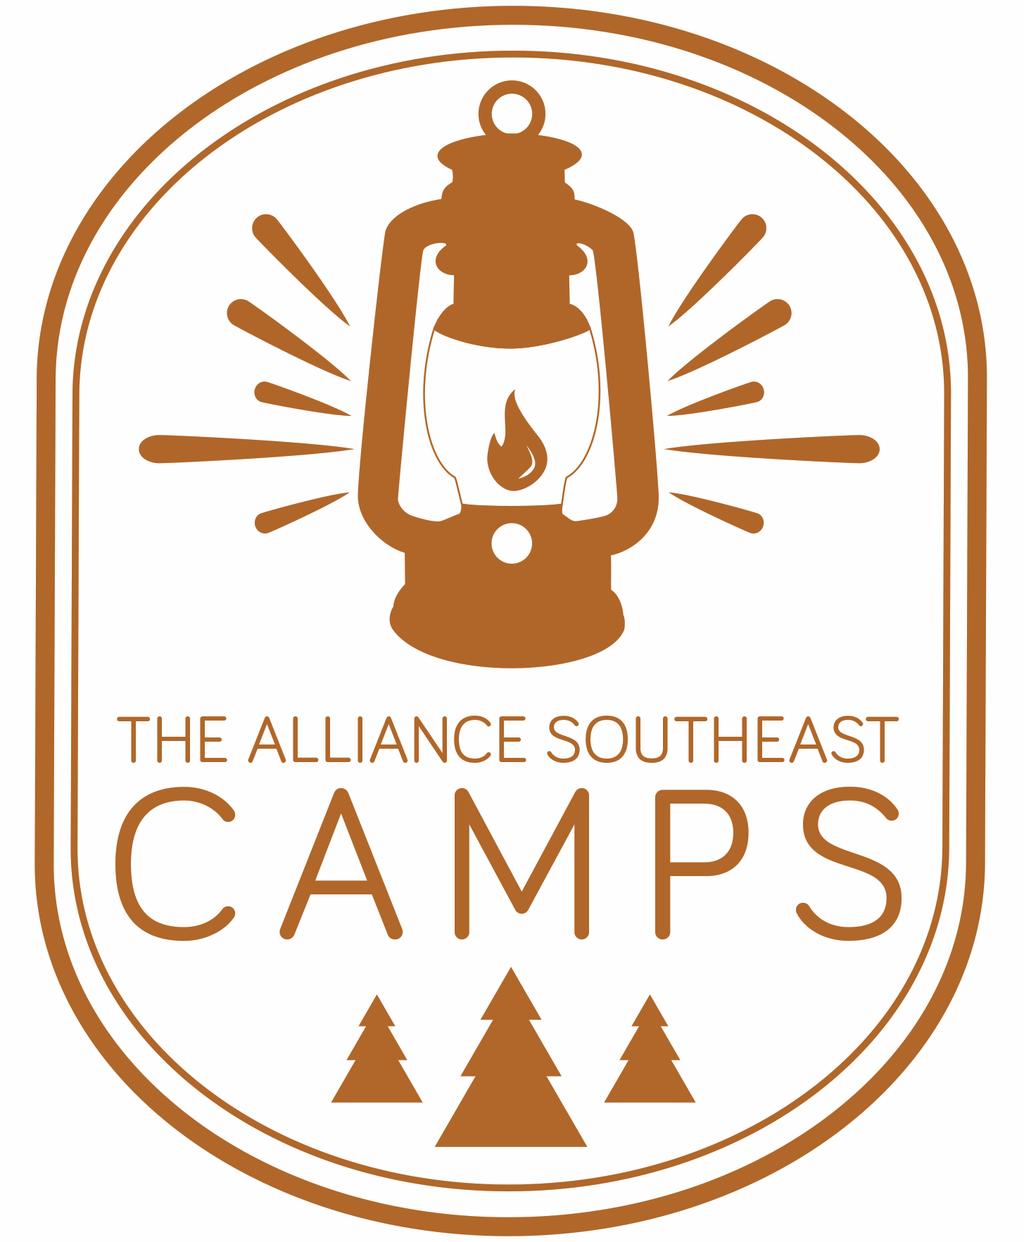 fusion 2018 DEAR CAMPERS AND PARENTS/GUARDIANS, Camp is rapidly approaching and we are excited that you chose TASE (The Alliance Southeast) Camps at Lake Swan to serve your camper this summer!